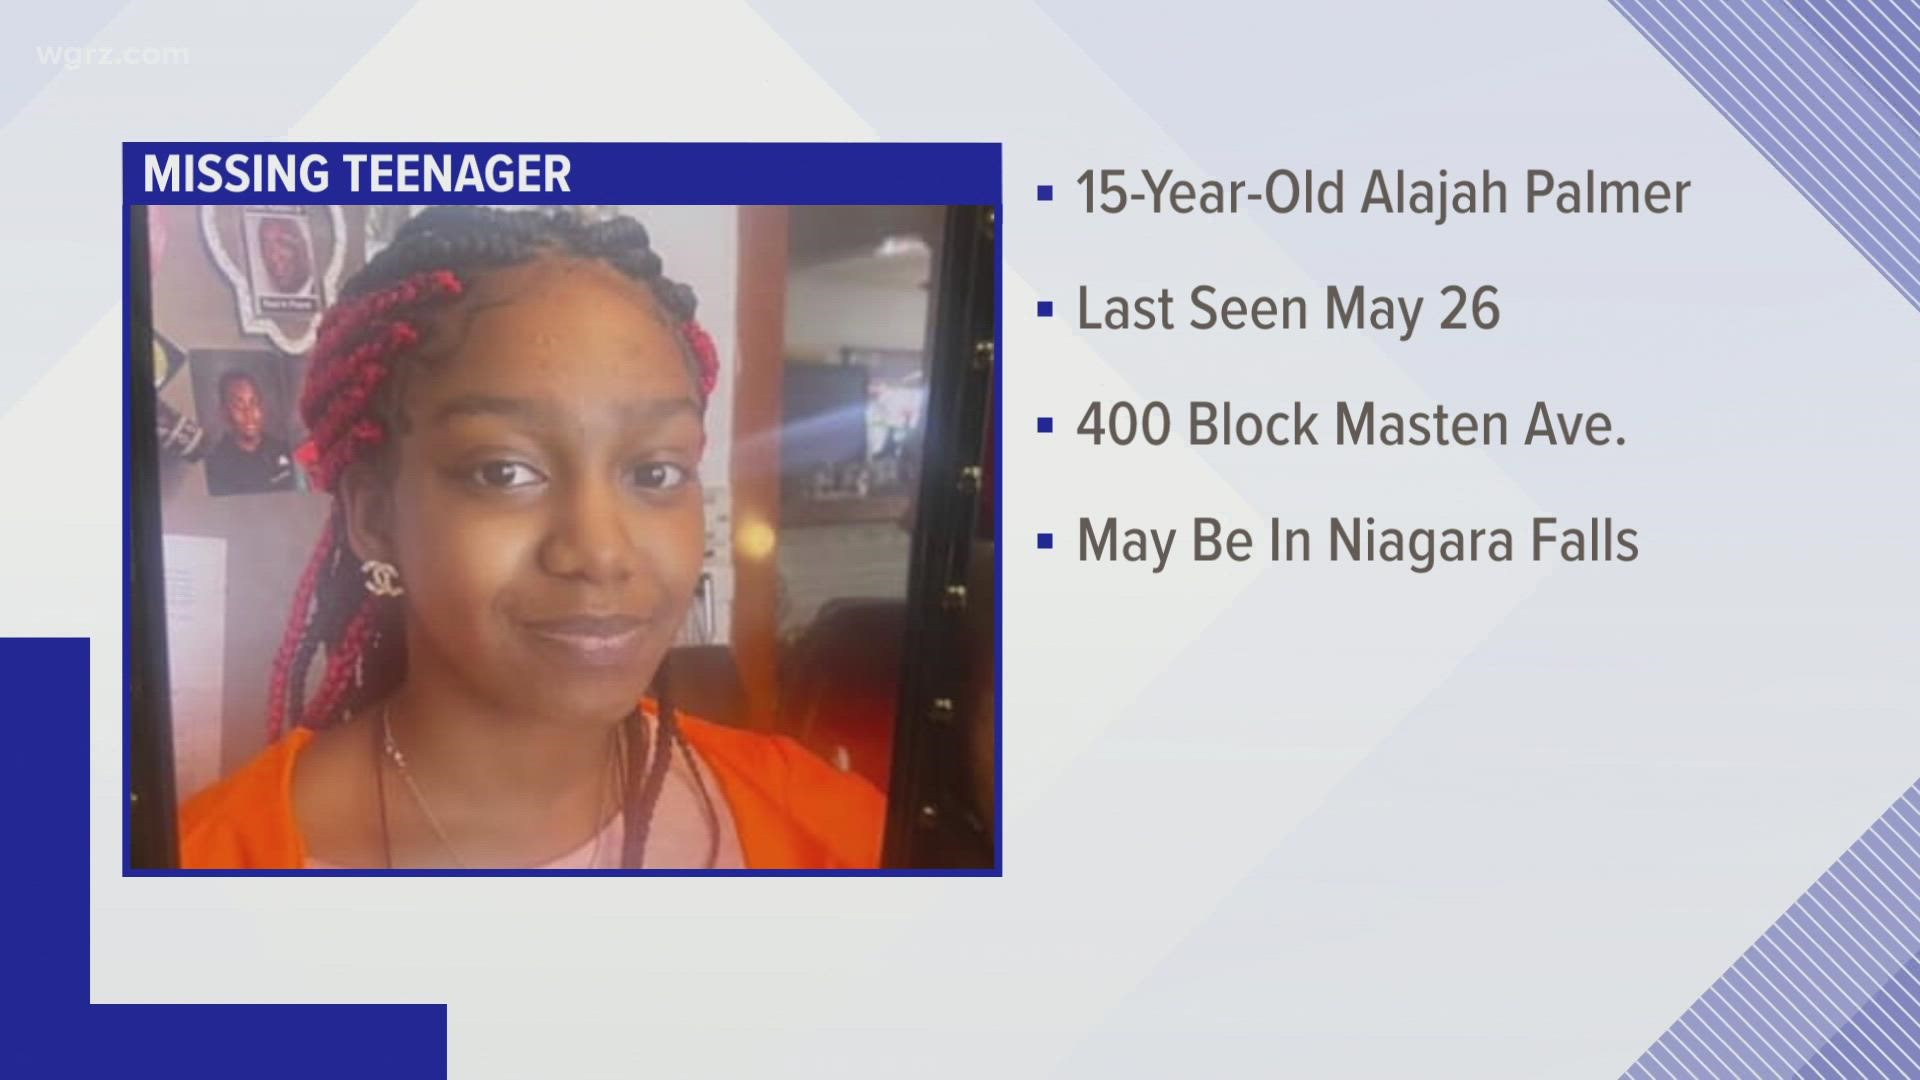 Police need help in finding a missing teenager, 15 year old Alajah Palmer. She was last seen around 3 this afternoon on Masten Ave.